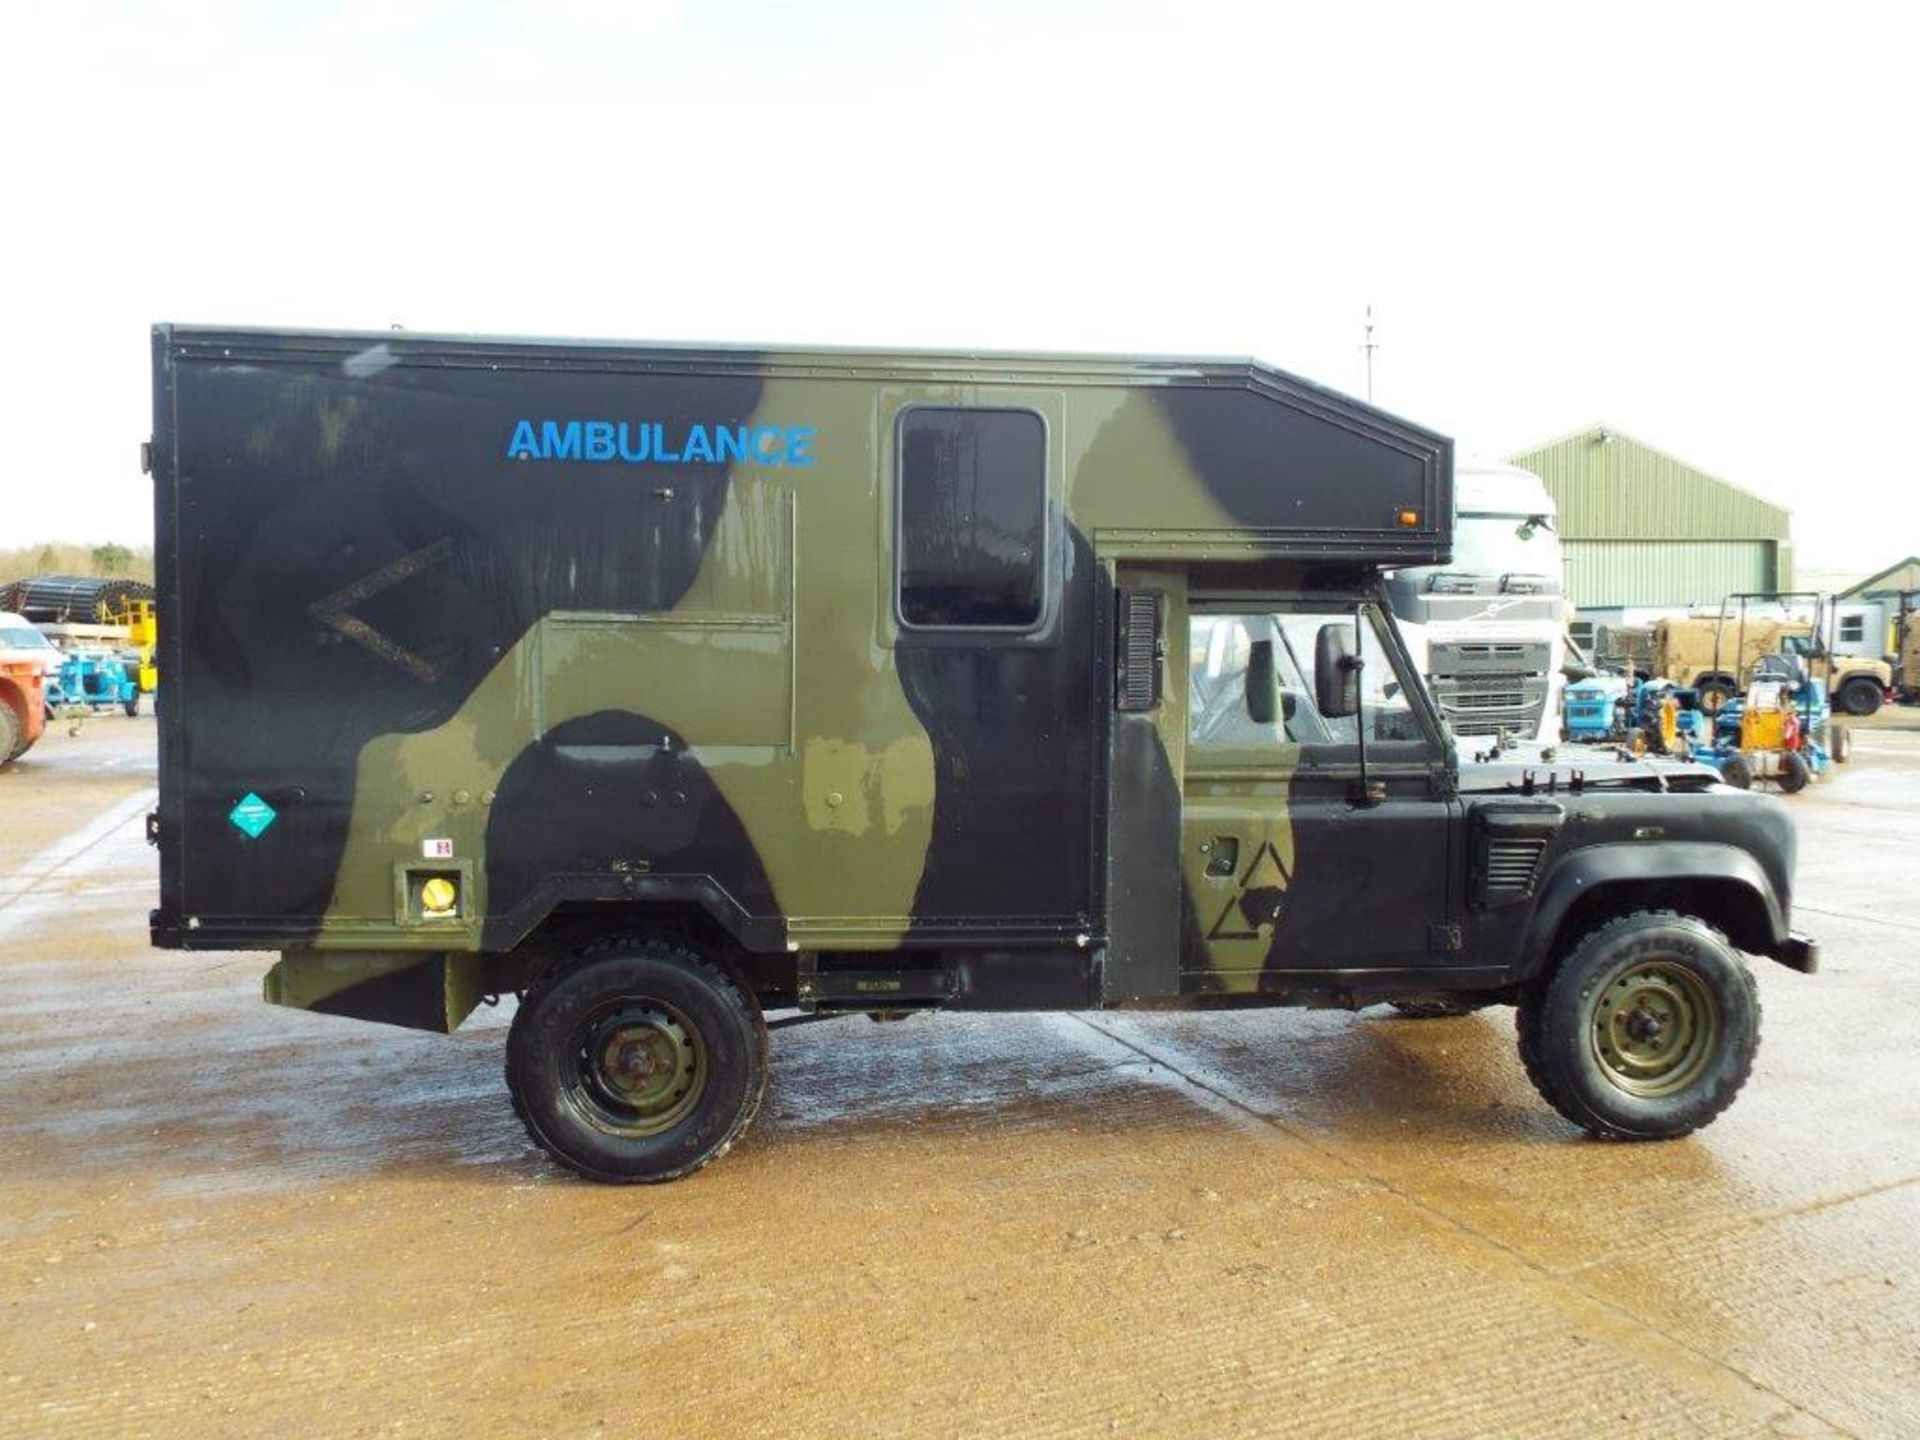 Military Specification LHD Land Rover Wolf 130 ambulance - Image 8 of 23